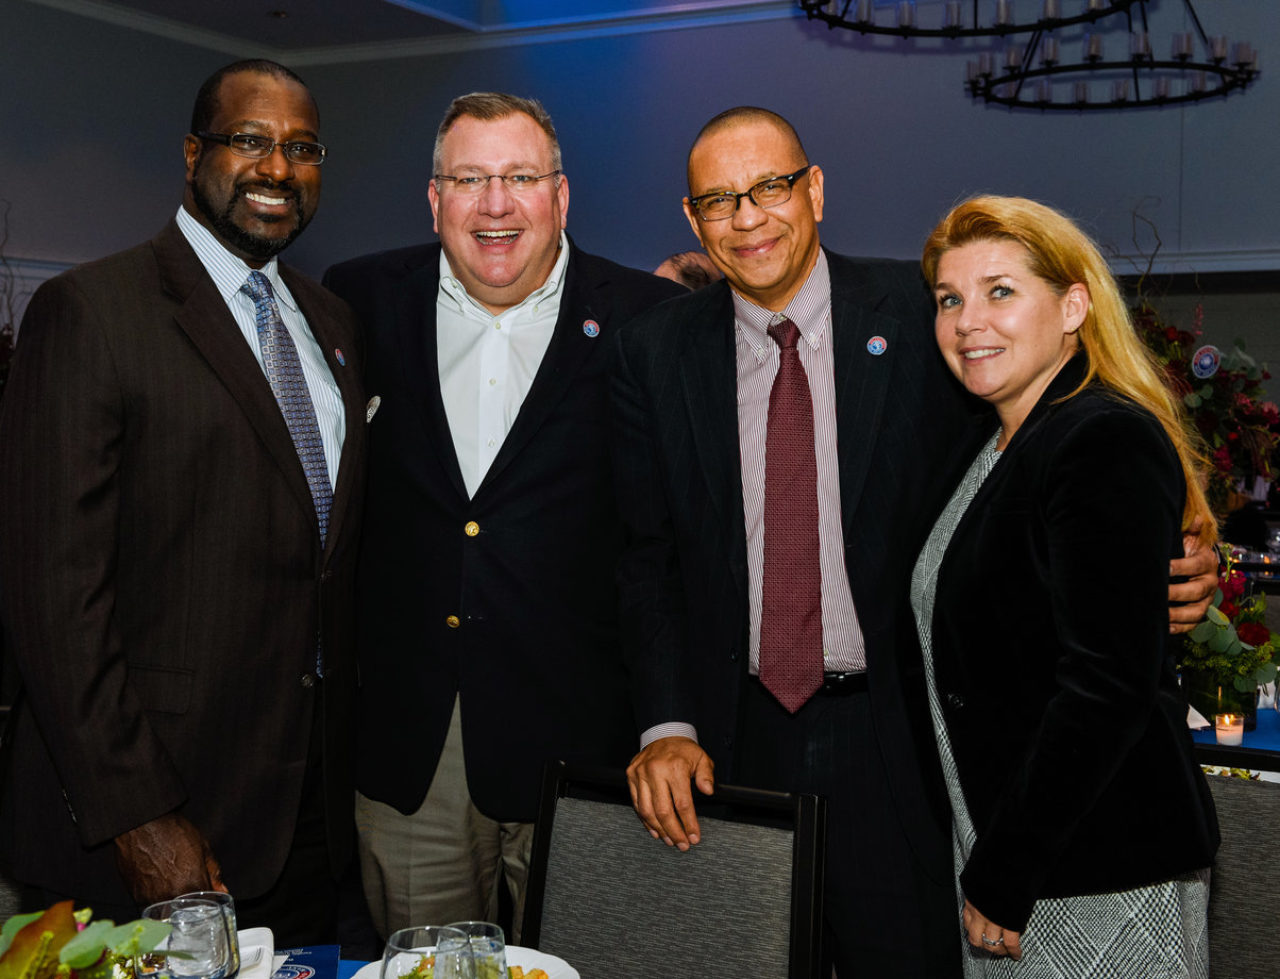 From left, alumni Gene Waddy and Chris Johnson, with Dale Caldwell, executive director of FDU’s Rothman Institute of Innovation and Entrepreneurship, and alumna Jennifer Johnson.